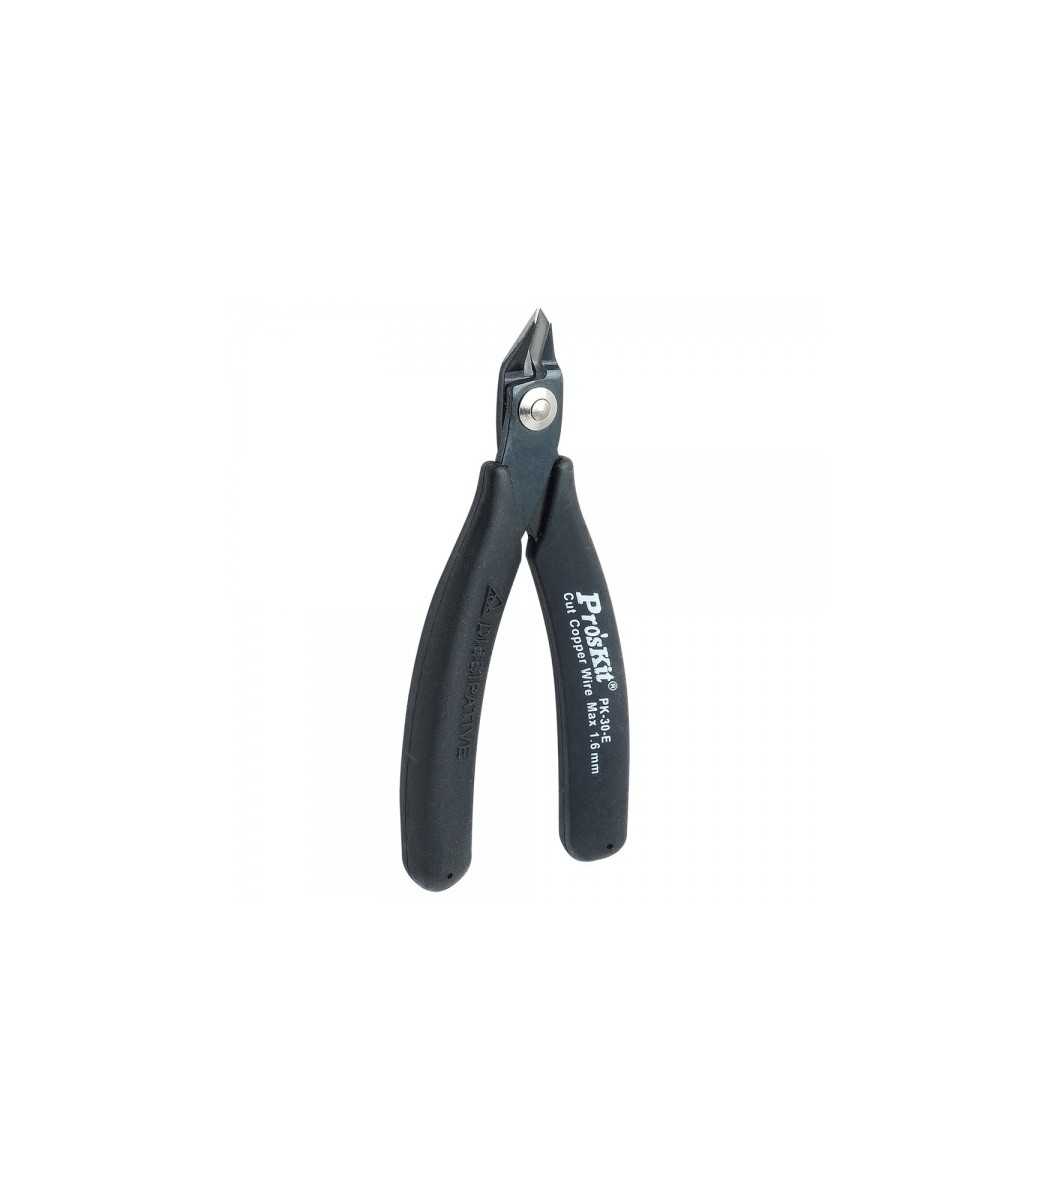 Proskit 1PK-30-E Thick Blade Diagonal Cutting Pliers with Anti-static Handle 125mm Black